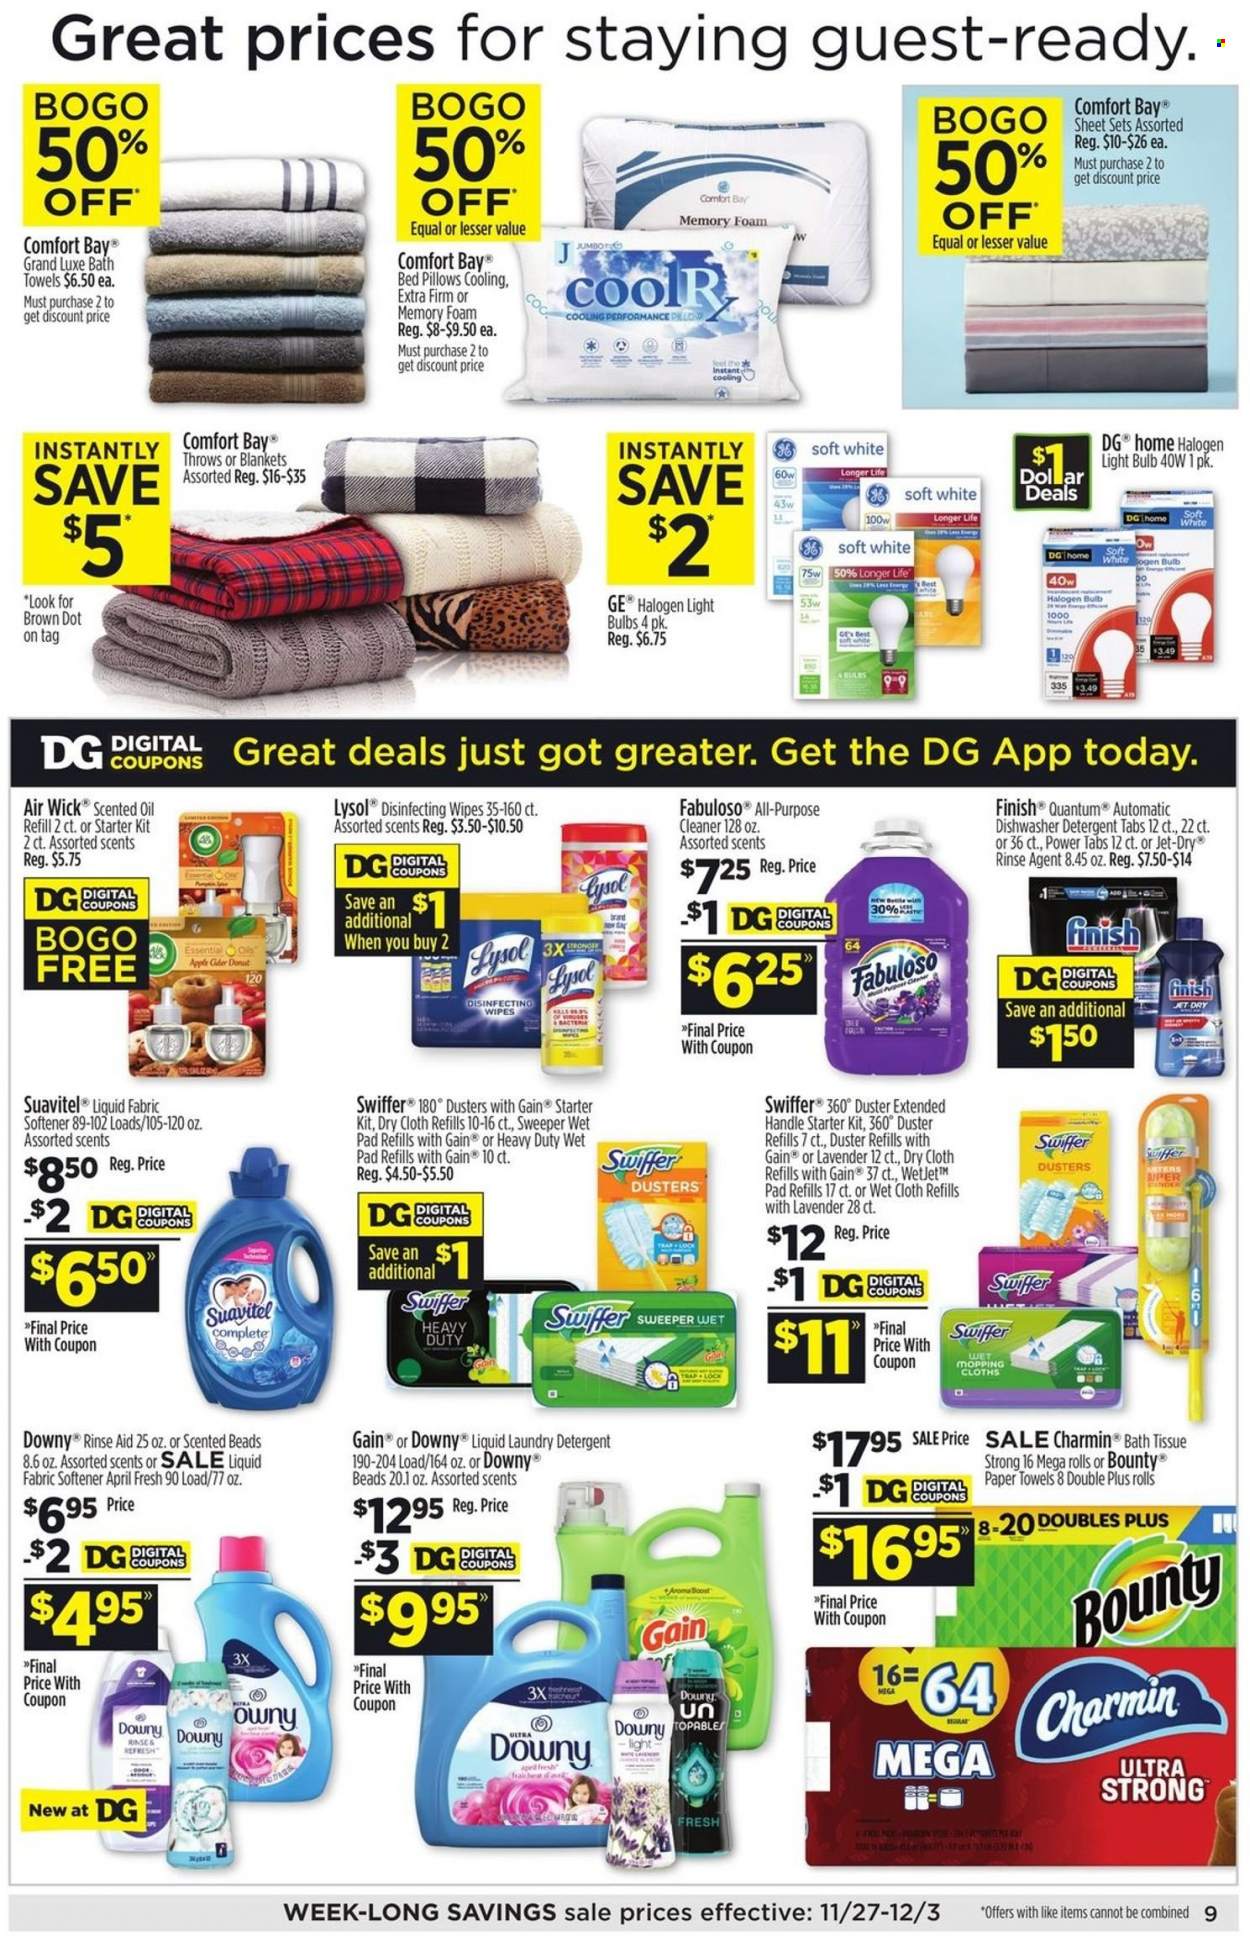 thumbnail - Dollar General Flyer - 11/27/2022 - 12/03/2022 - Sales products - donut, Bounty, oil, apple cider, cider, wipes, bath tissue, kitchen towels, paper towels, Charmin, detergent, Gain, cleaner, Lysol, Fabuloso, Swiffer, fabric softener, laundry detergent, Downy Laundry, Finish Powerball, Finish Quantum Ultimate, Jet, duster, wet pad refill, Air Wick, scented oil, essential oils, bulb, light bulb, blanket, pillow, bath towel. Page 8.